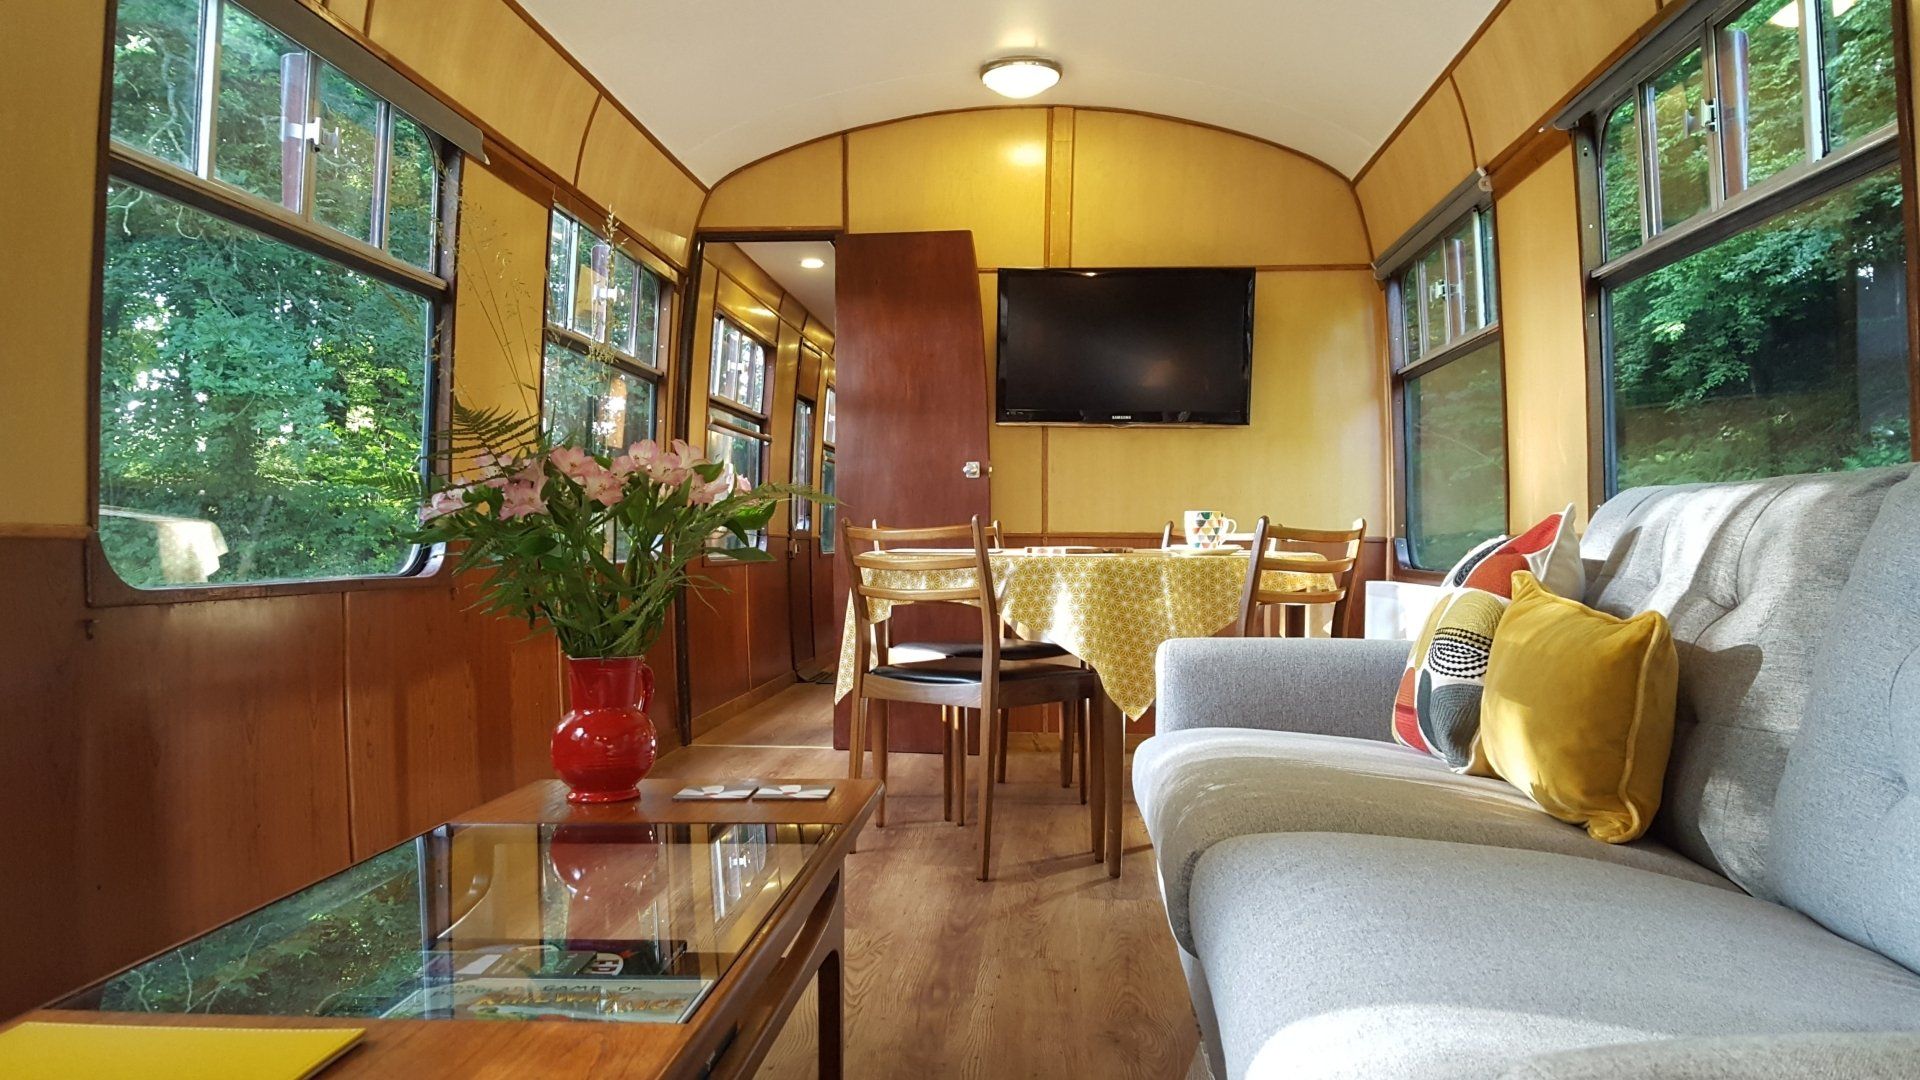 The saloon lounge-diner is comfortably furnished with  1960s vintage furniture, enjoys panoramic views over the green platform. For the evenings, the blinds provide privacy while choosing to lounge in front of the television.